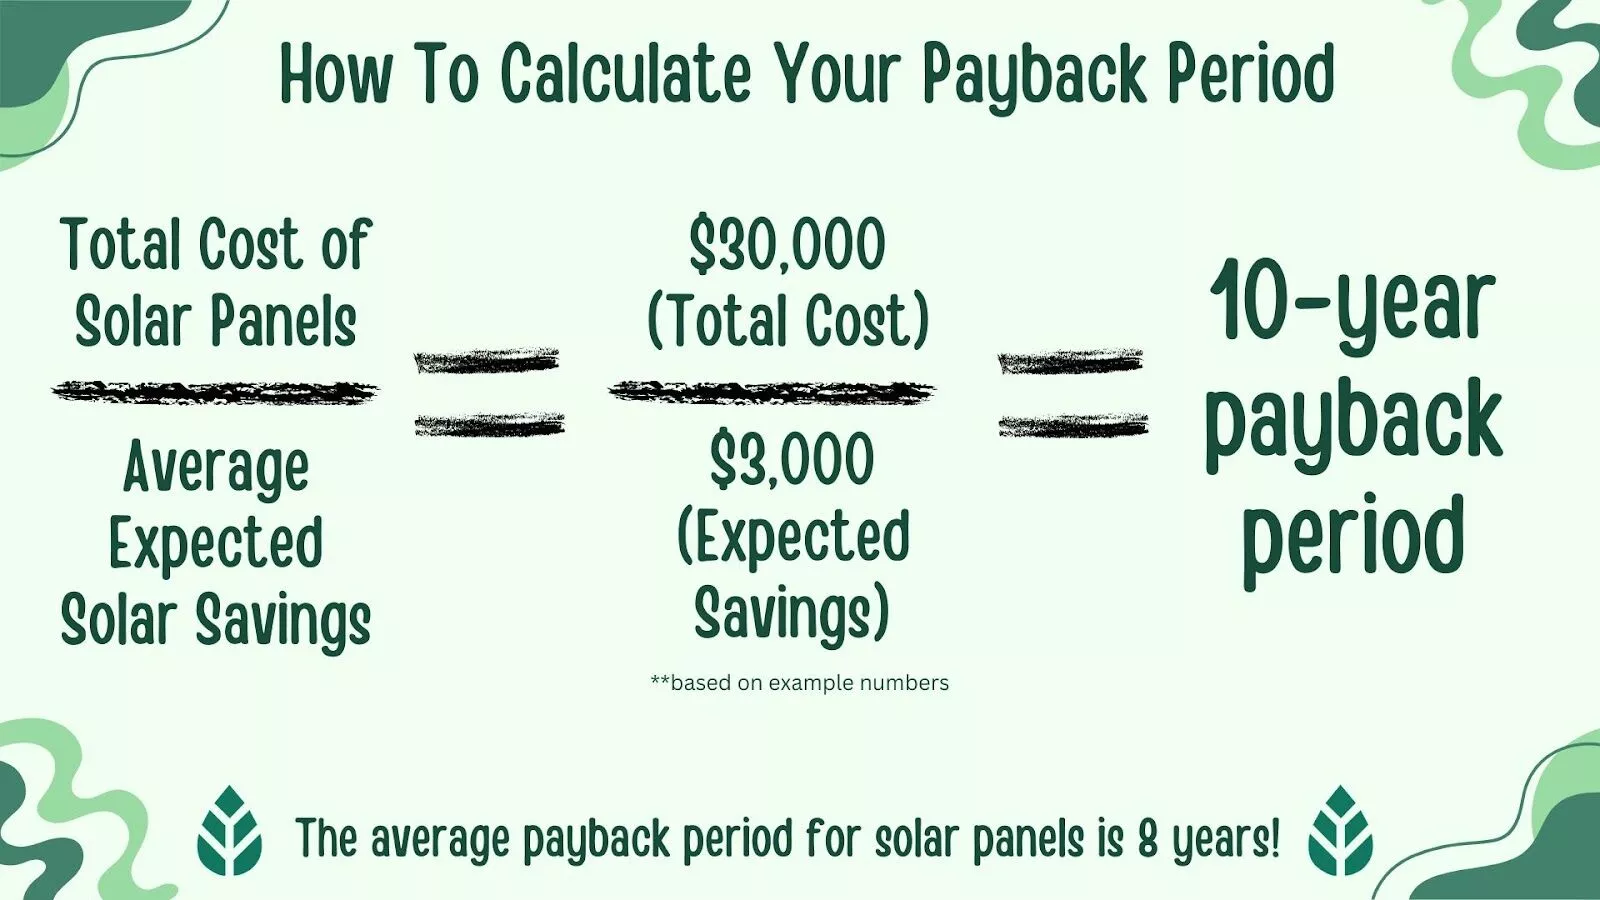 How Do I Calculate My Solar Payback Period